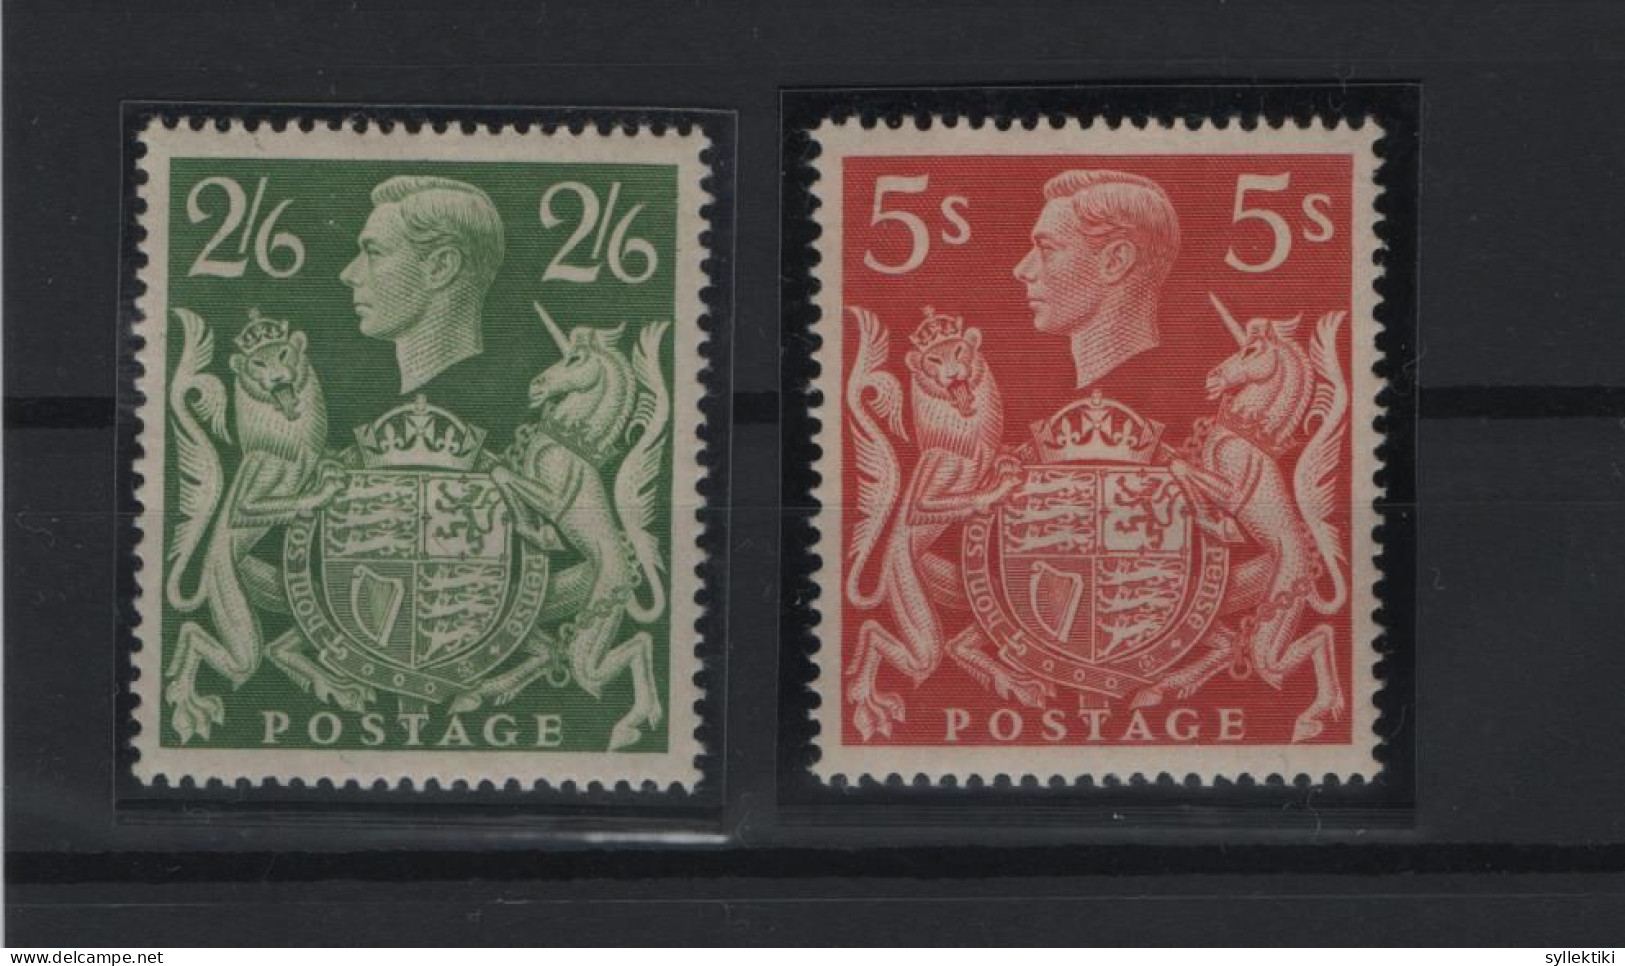 GREAT BRITAIN 1939 KGVI 2/6 & 5 SHILLINGS 2 DIFFERENT MNH STAMPS  STANLEY GIBBONS N 476b, 477  AND VALUE GBP 35.00 - Ongebruikt